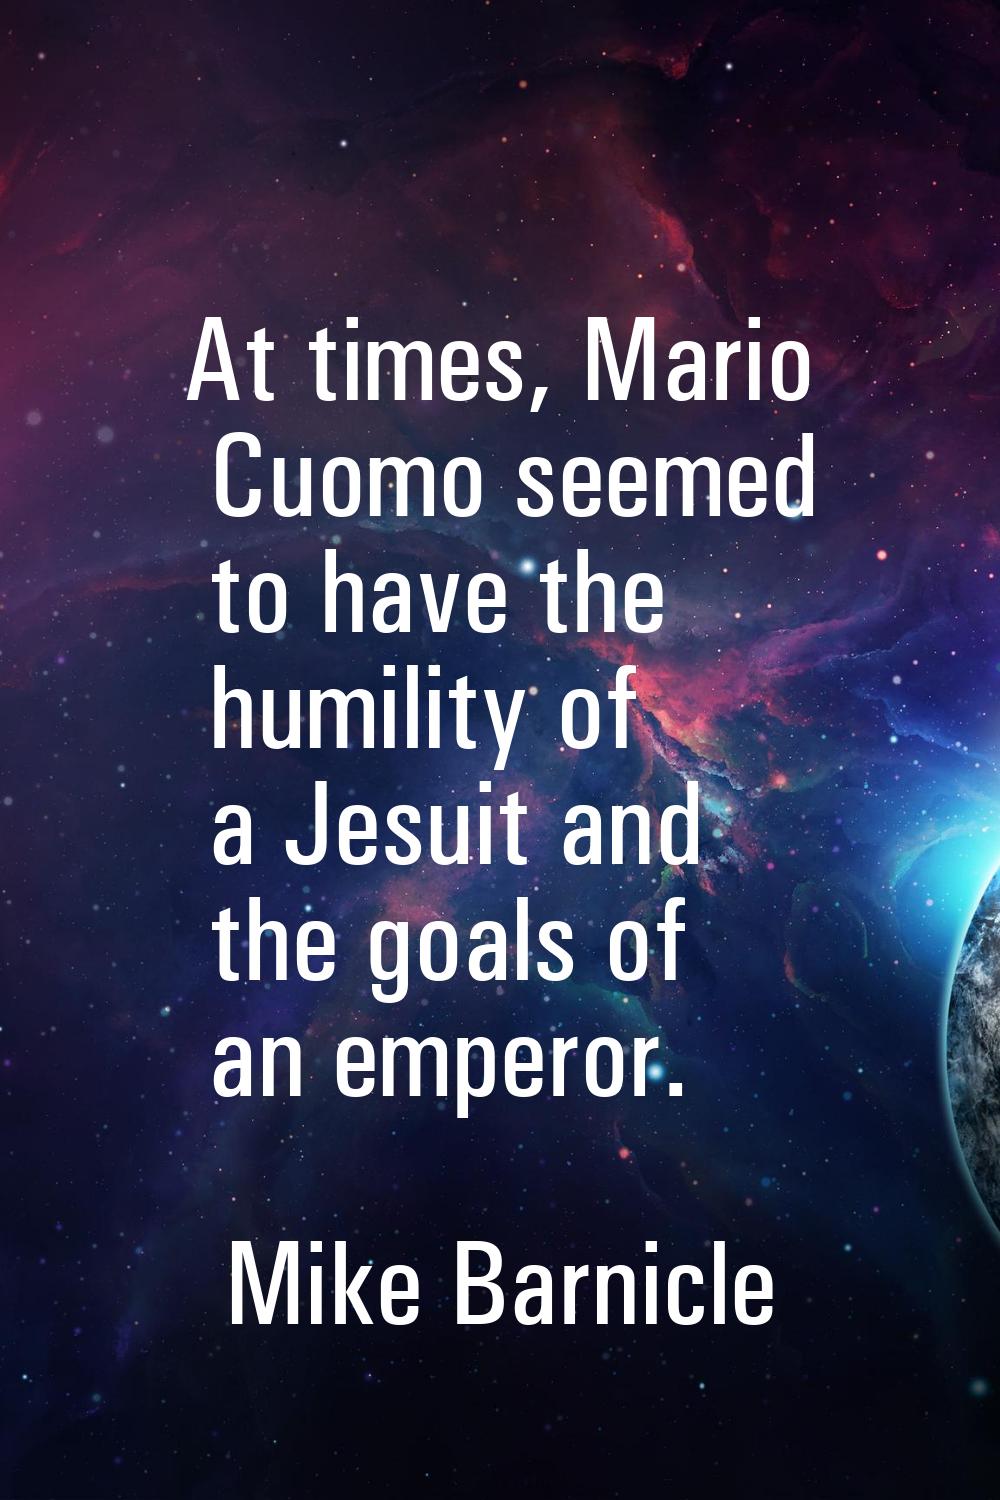 At times, Mario Cuomo seemed to have the humility of a Jesuit and the goals of an emperor.